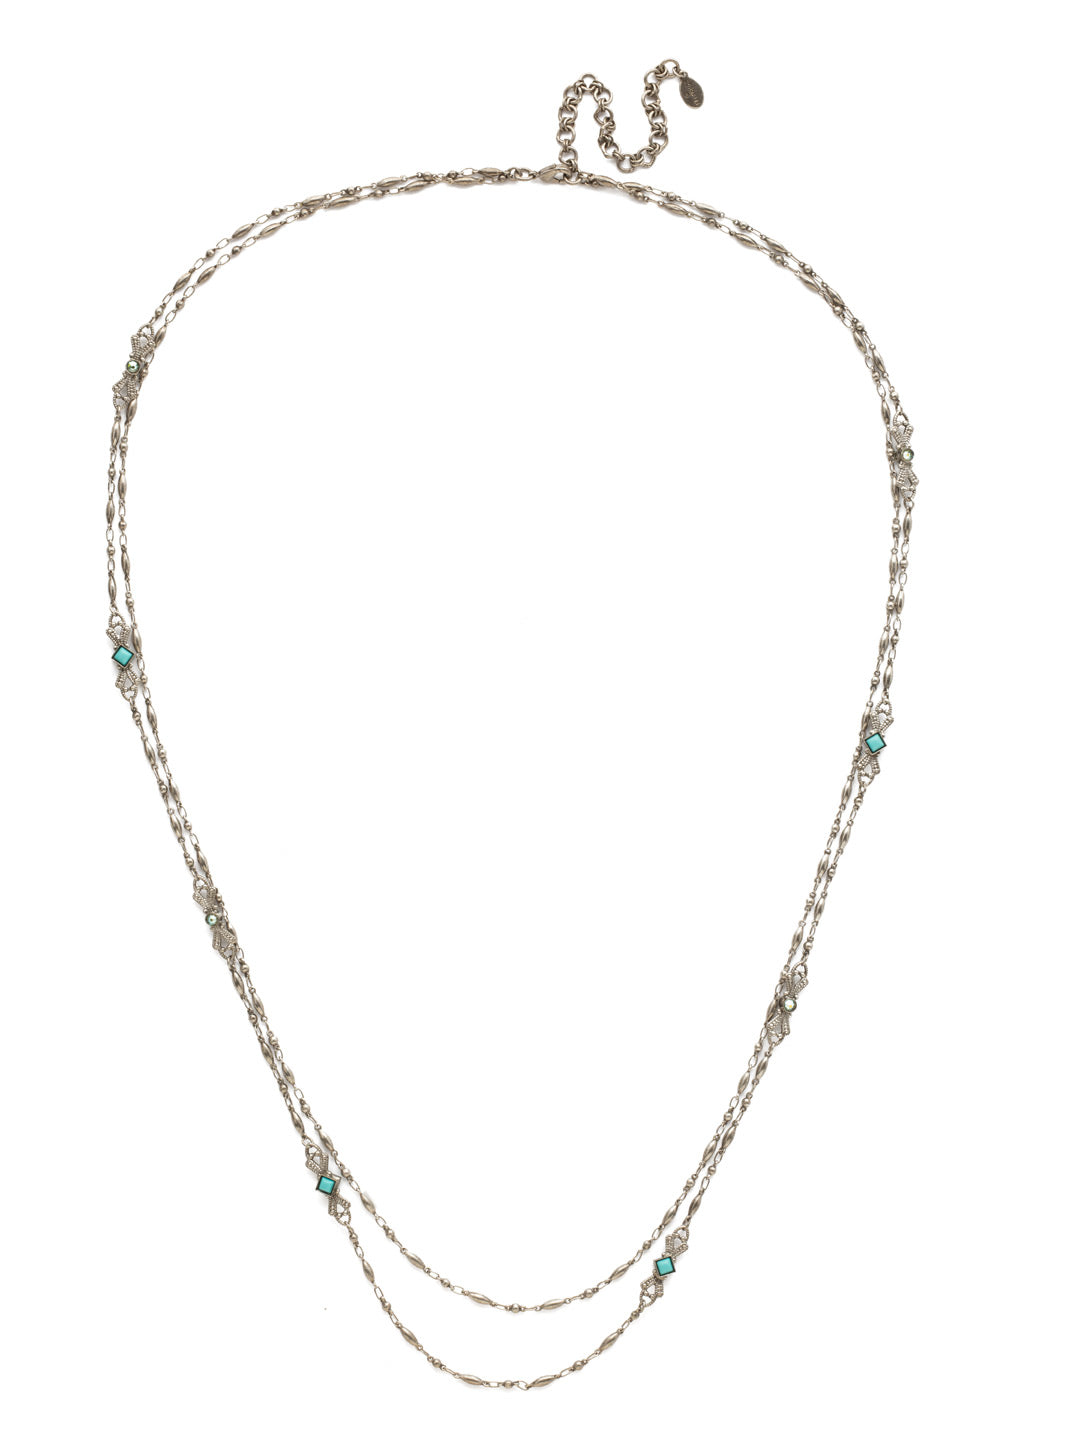 Sage Necklace - NDS14ASVH - <p>A decorative chain is adorned with an alternating pattern of crystals and semi-precious stones in this understated style. From Sorrelli's Vivid Horizons collection in our Antique Silver-tone finish.</p>